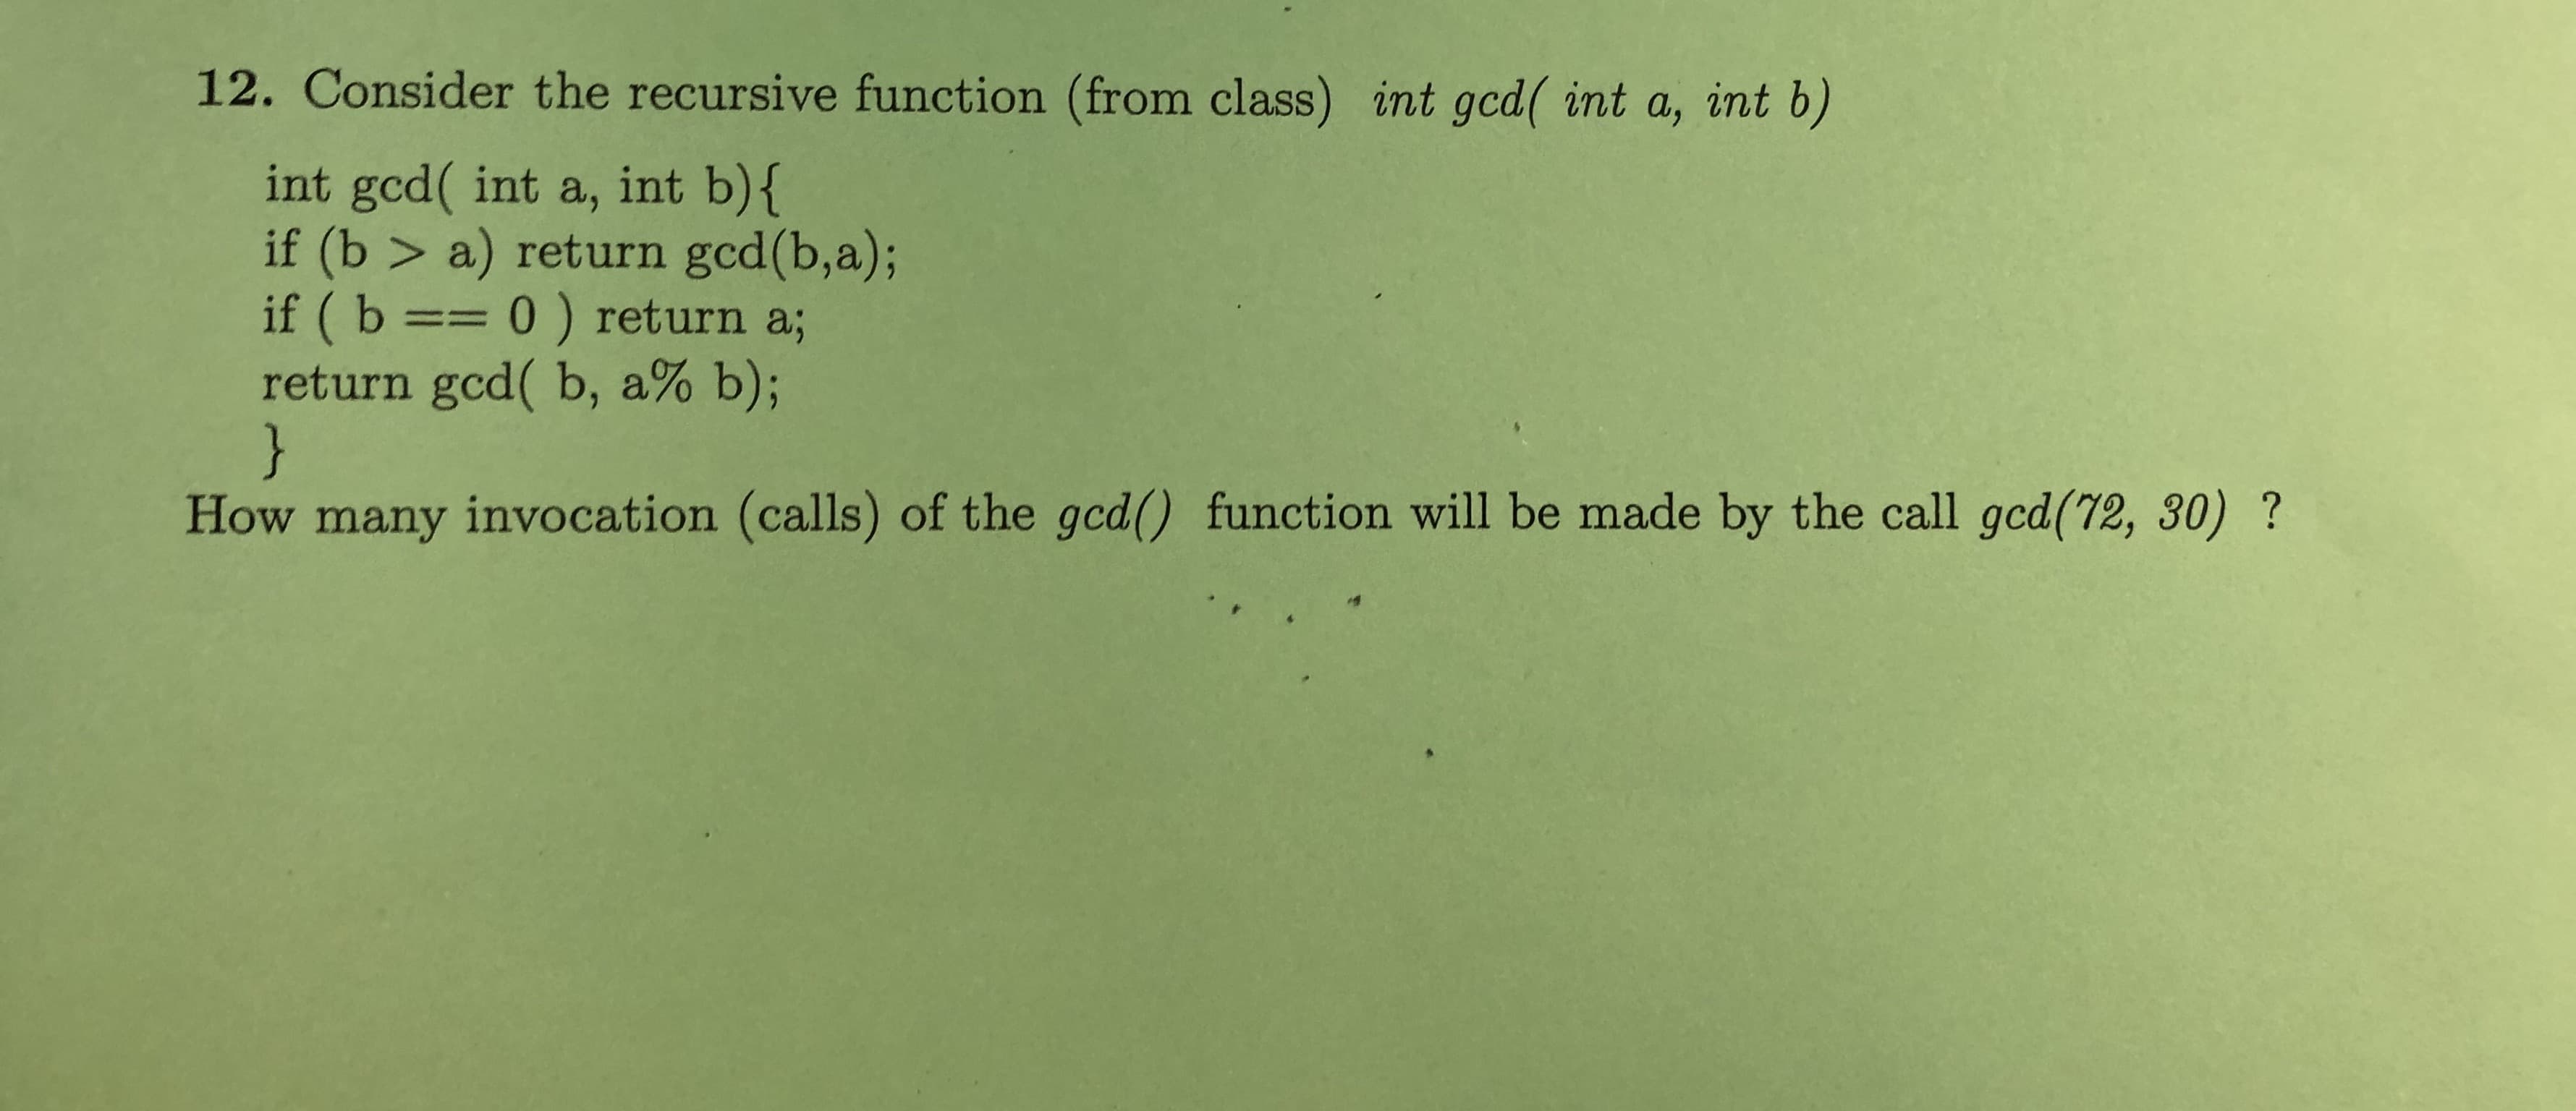 12. Consider the recursive function (from class) int gcd( int a, int b)
int gcd( int a, int b){
if (b > a) return gcd(b,a);
if ( b == 0 ) return a;
return gcd( b, a% b);
}
How many invocation (calls) of the gcd() function will be made by the call gcd(72, 30) ?
